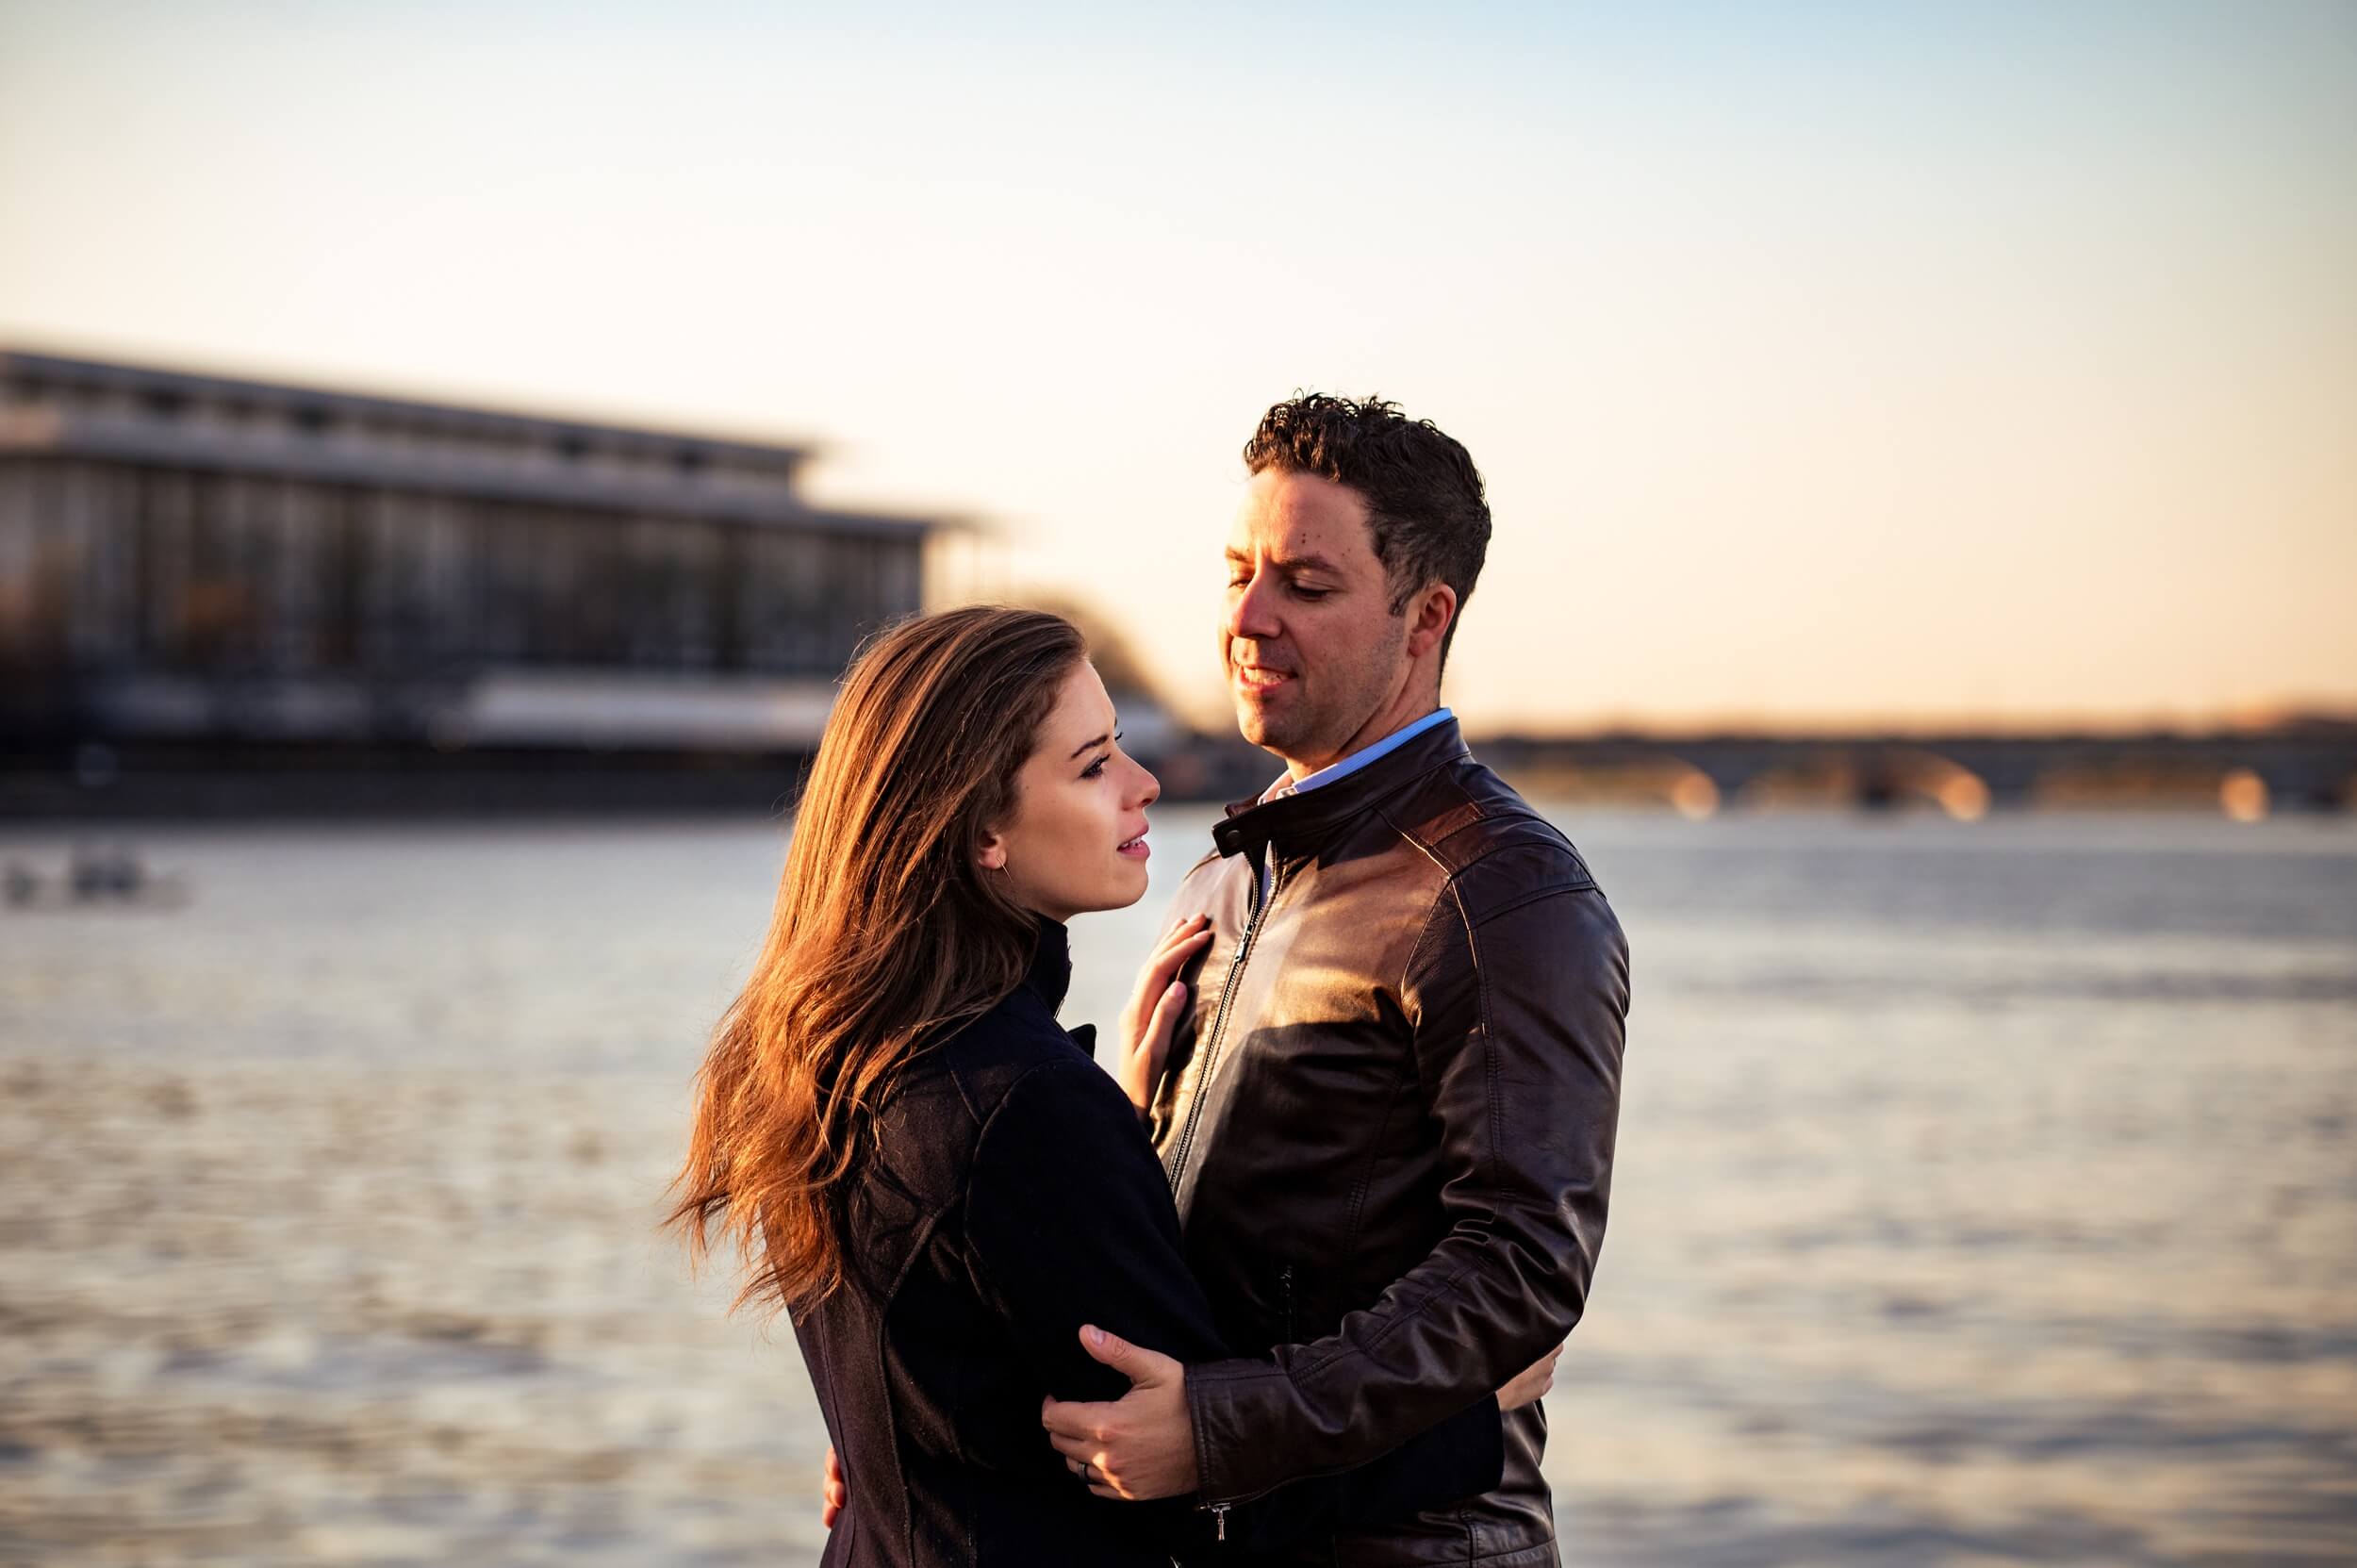 sunrise in georgetown dc photographer engagement photos 1